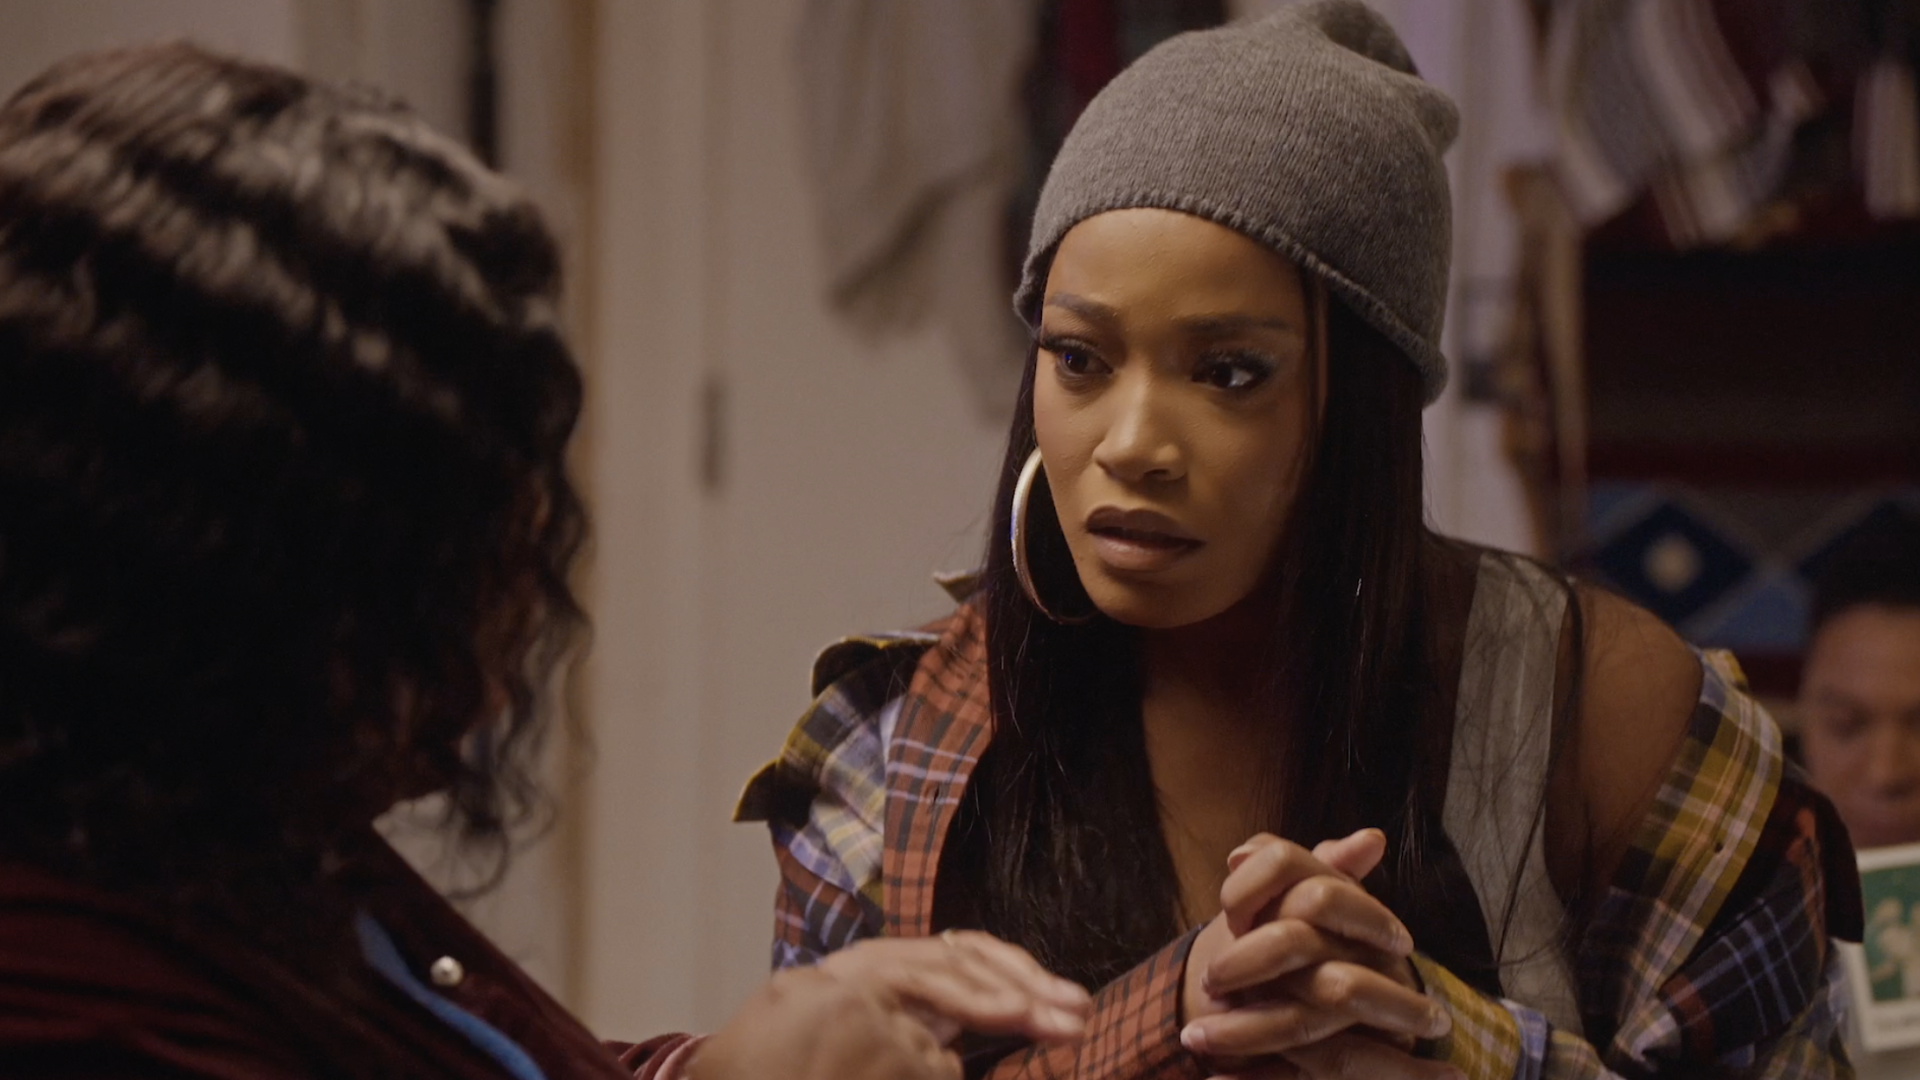 EXCLUSIVE: Keke Palmer Releases Trailer For New Scripted Comedy Series, ‘Bosses’